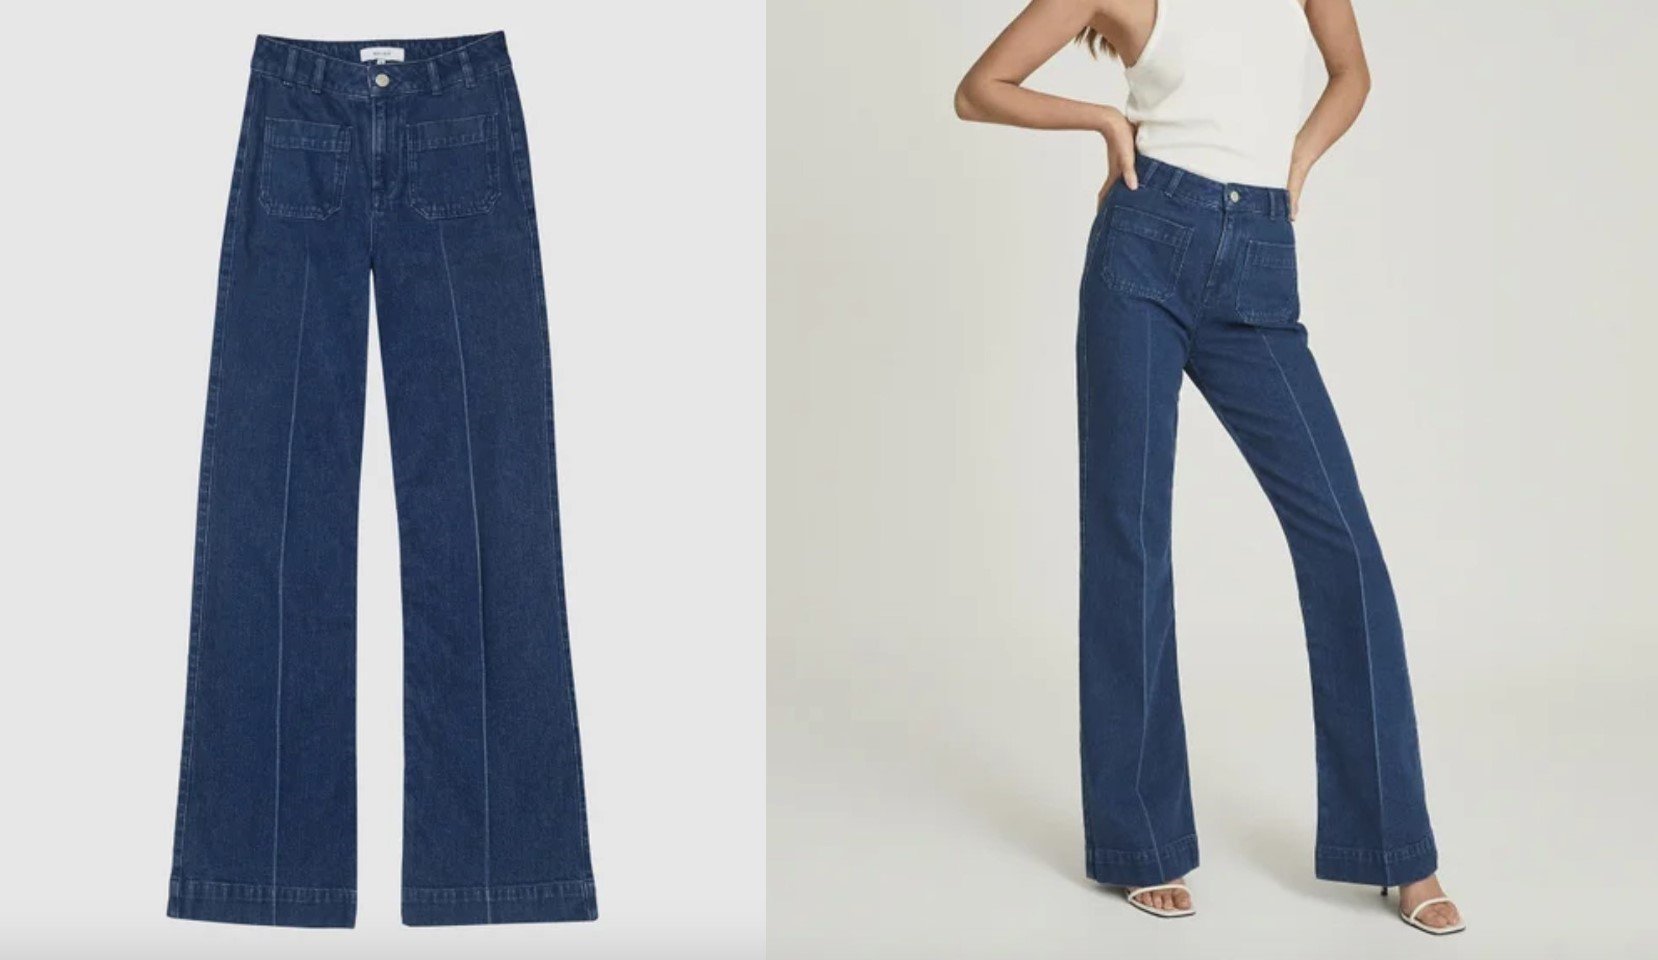 AW21 Trend Spotlight: 3 Jeans Shapes To Wear Now — NHJ Style Consultancy